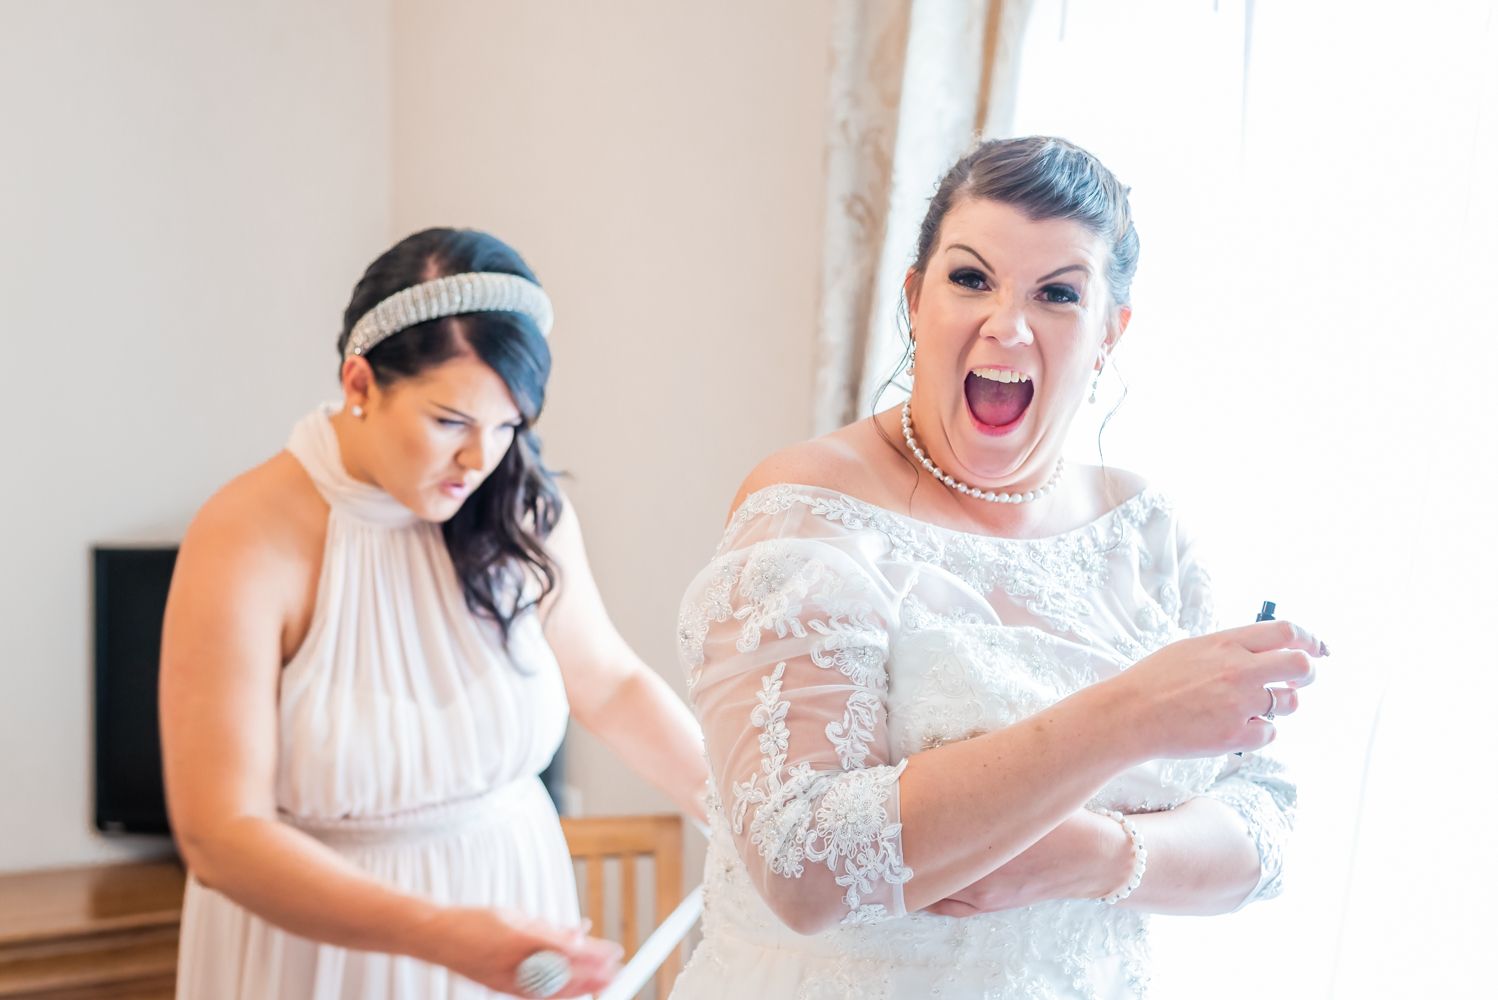 The bride pulls an ecited face as she looks directly down the camera, her friend is doing up her wedding dress for her and she's excited to marry her man.